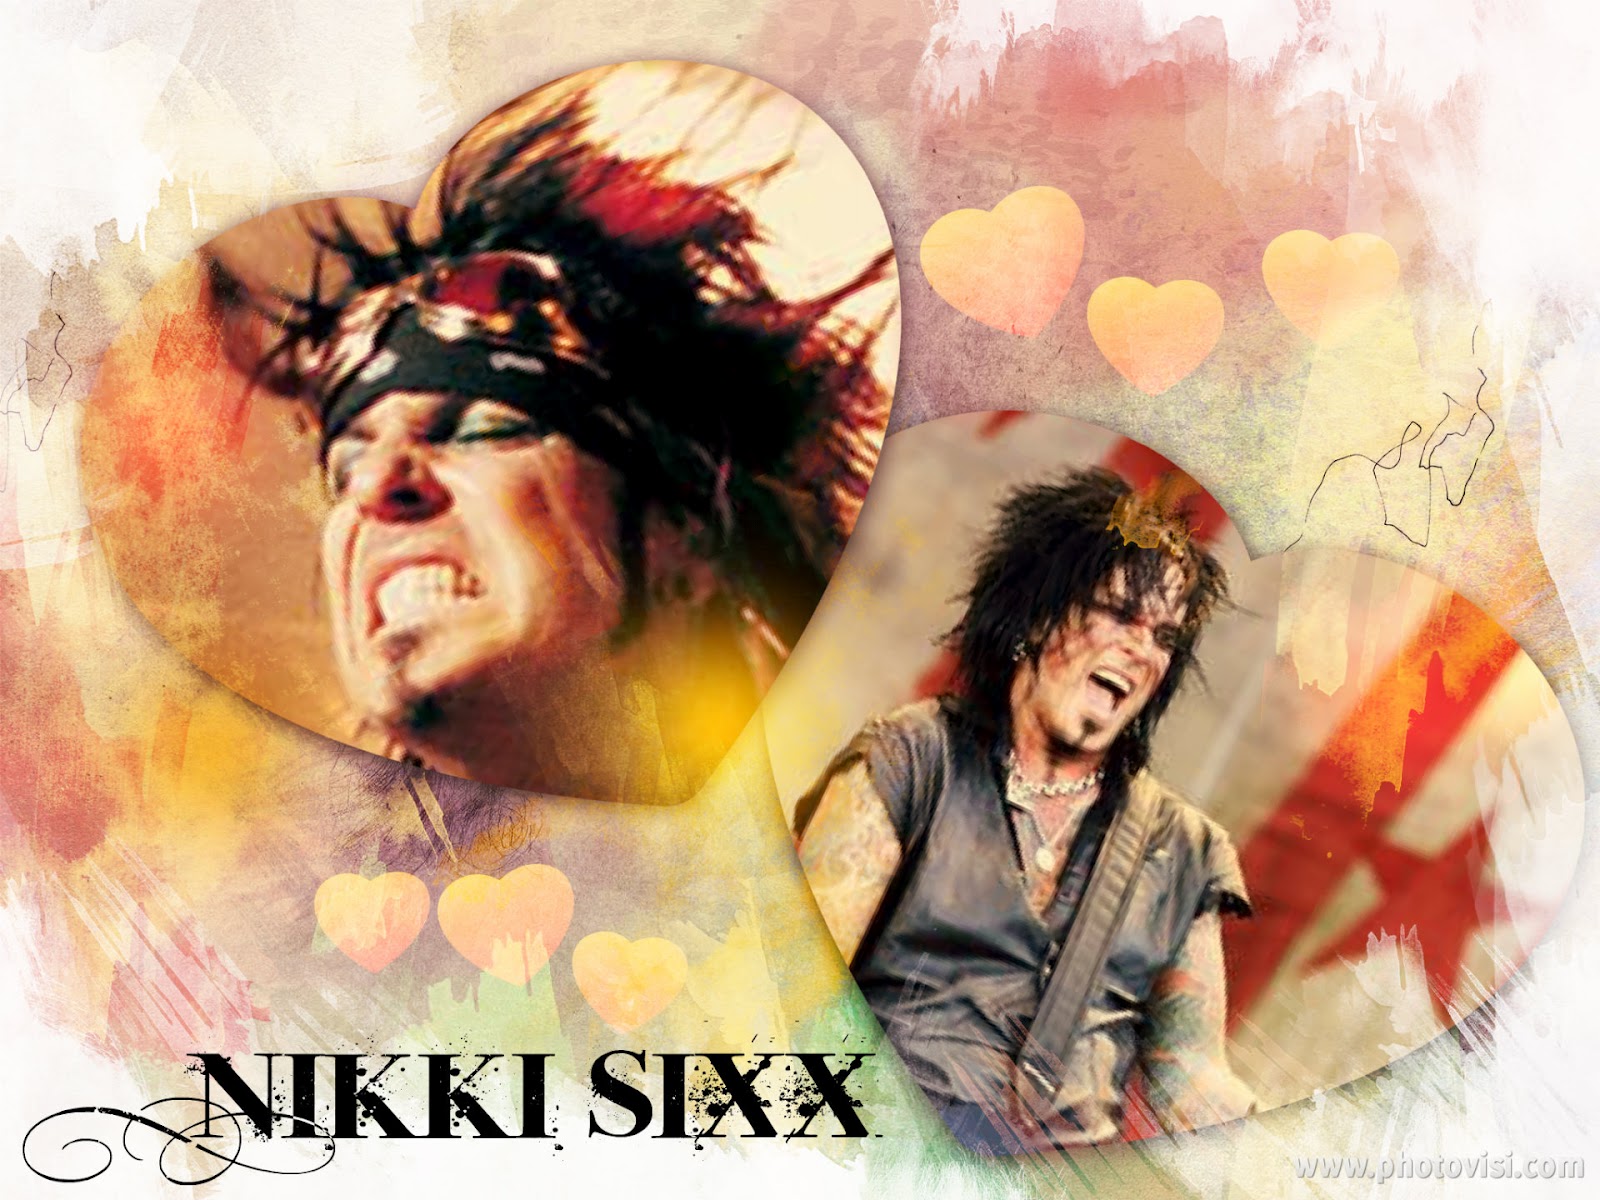 Nikki Sixx - still sexy after all these years